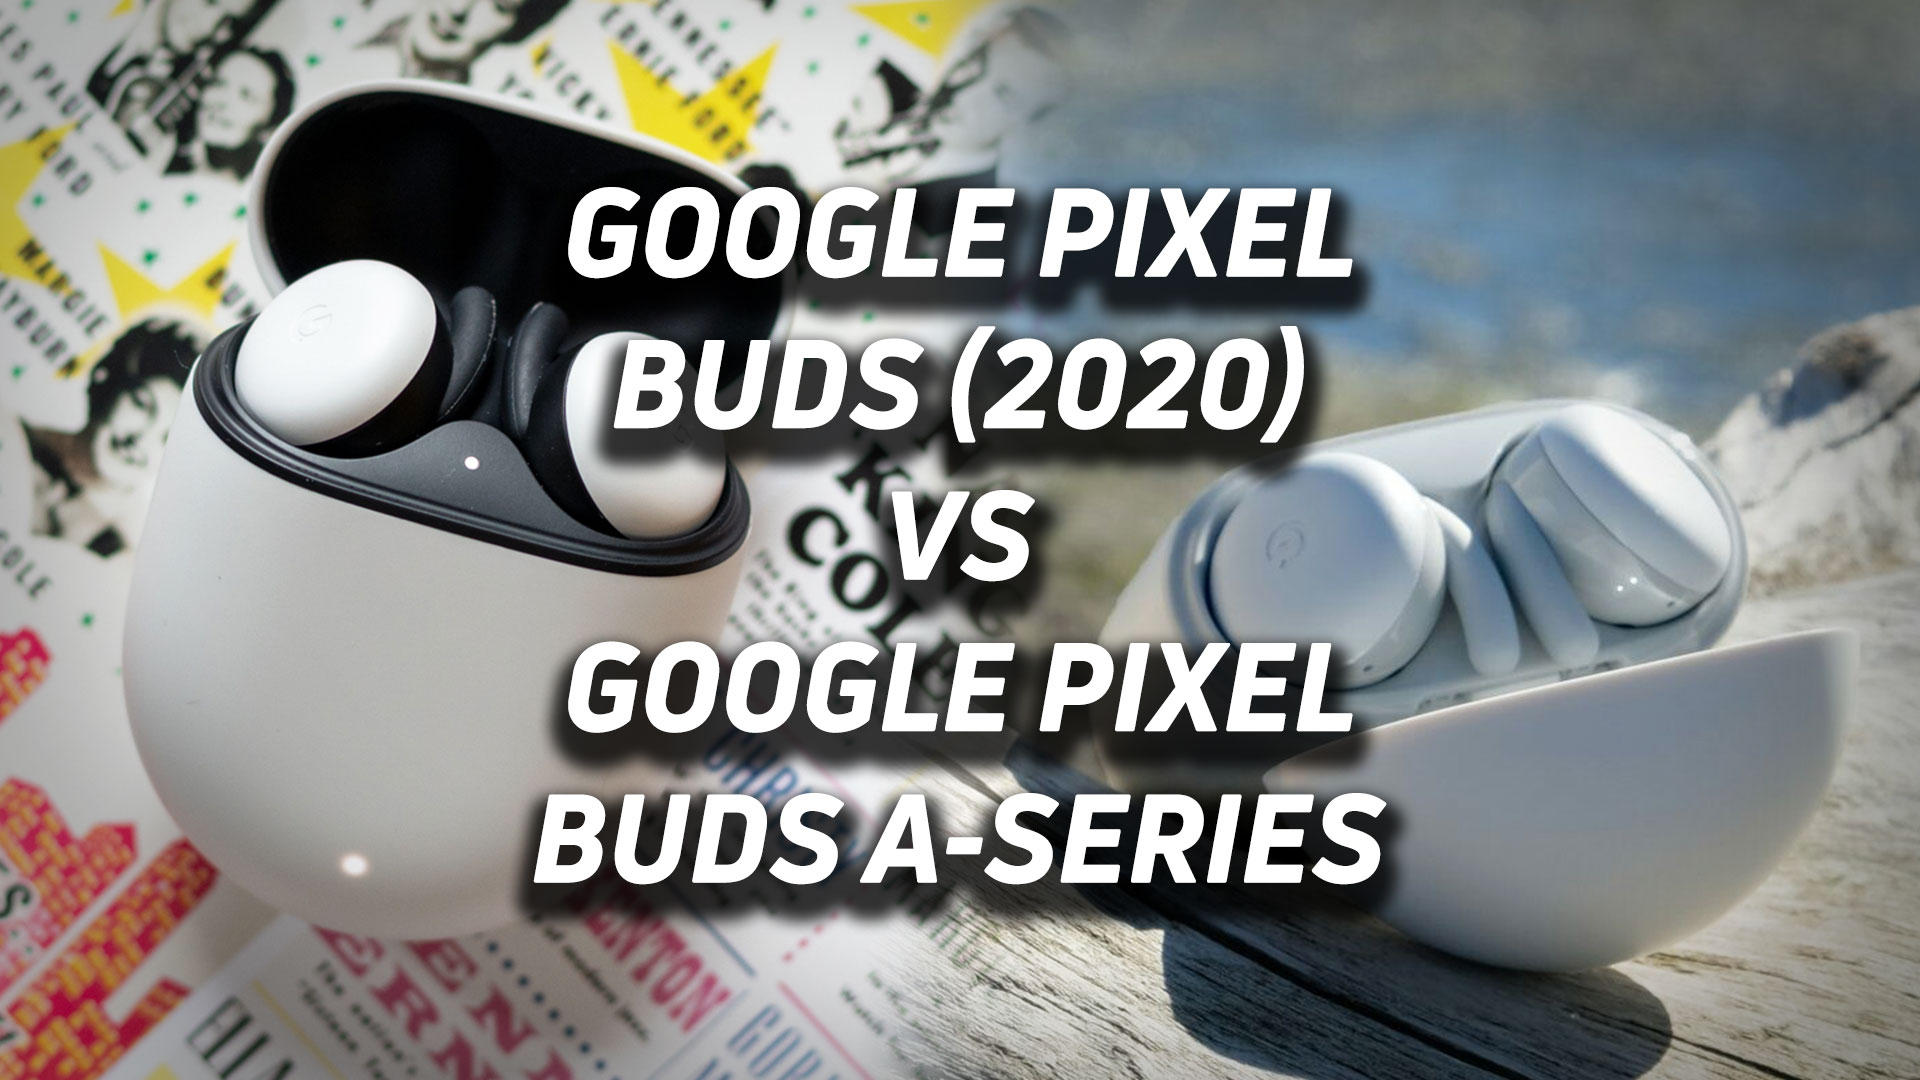 A blended image of the Google Pixel Buds (2020) vs Google Pixel Buds A-Series with the appropriate versus text overlaid.